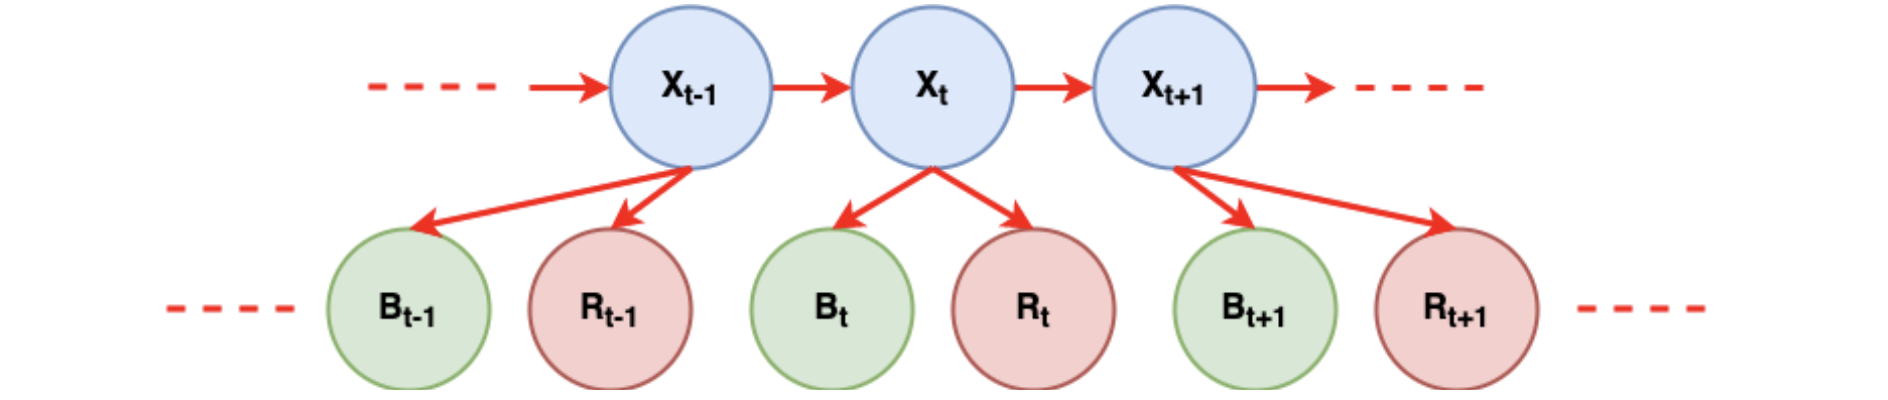 Bayesian Network showing the causal cause-effect relationships